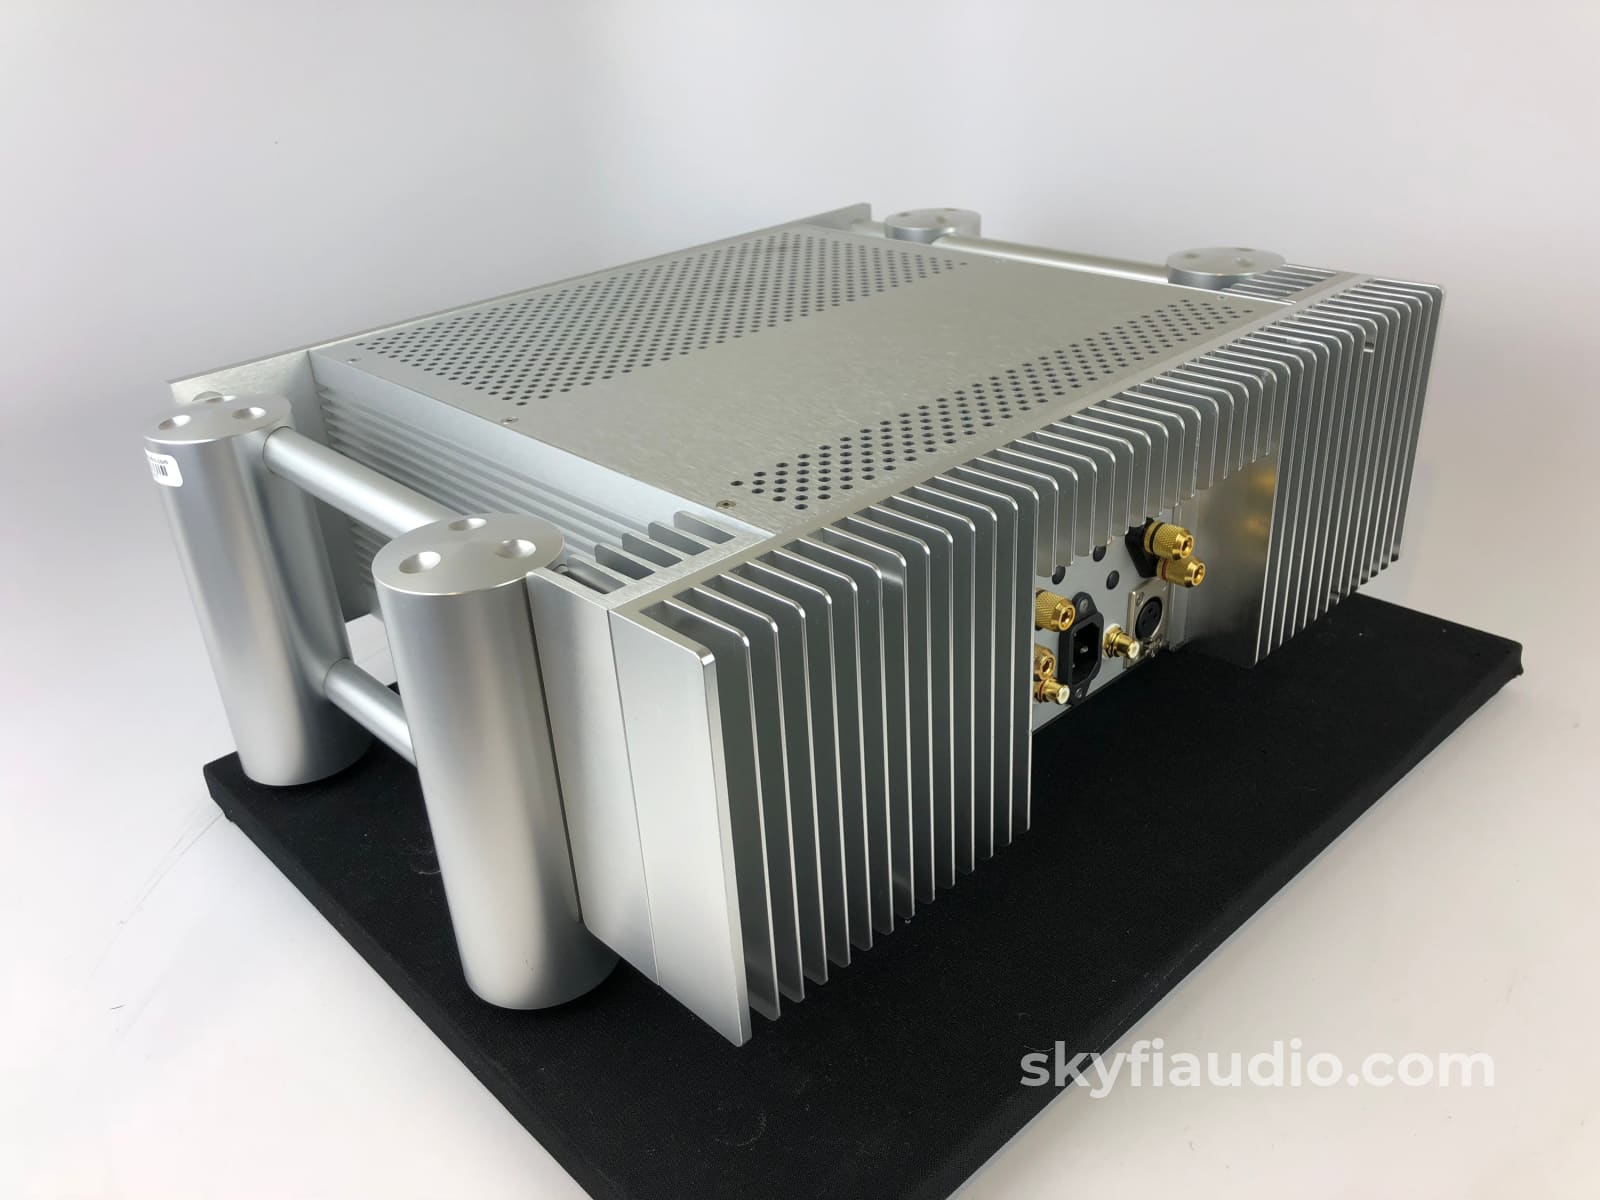 Chord Spm-1050 Solid State 200W Amplifier